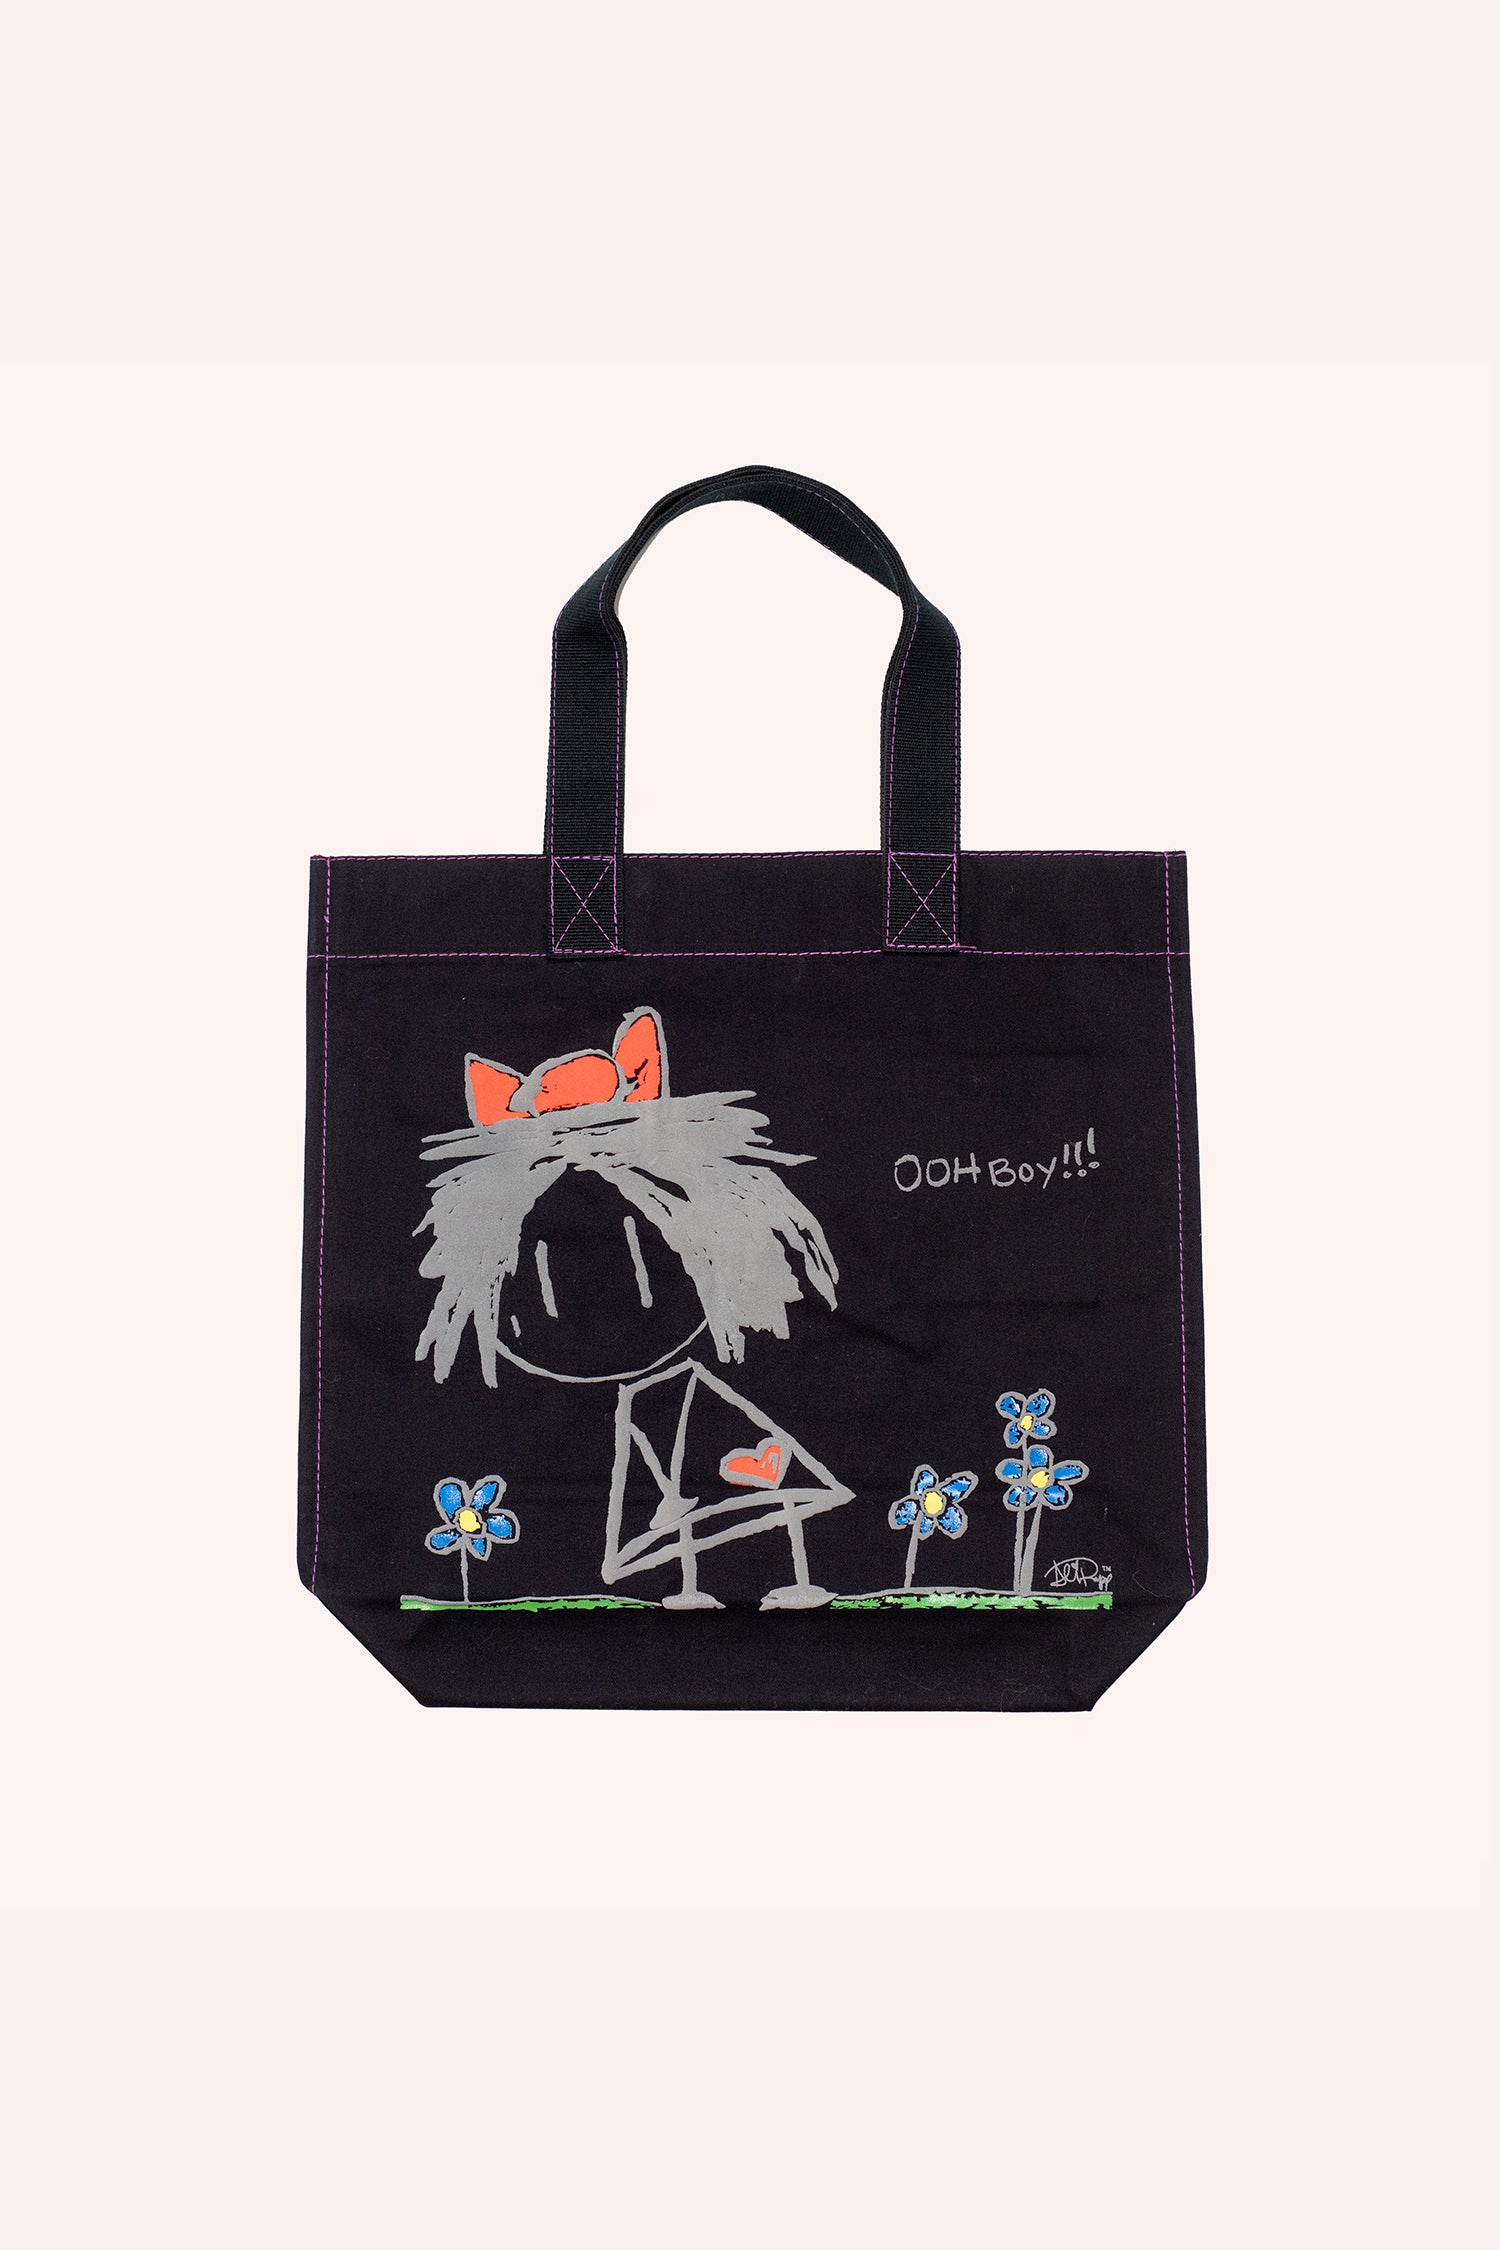 Tote bag, black squared shape, Ali Rapp artwork Happy girl with a red ribbon in hair and blue flowers, Ooh Boy!!! quote